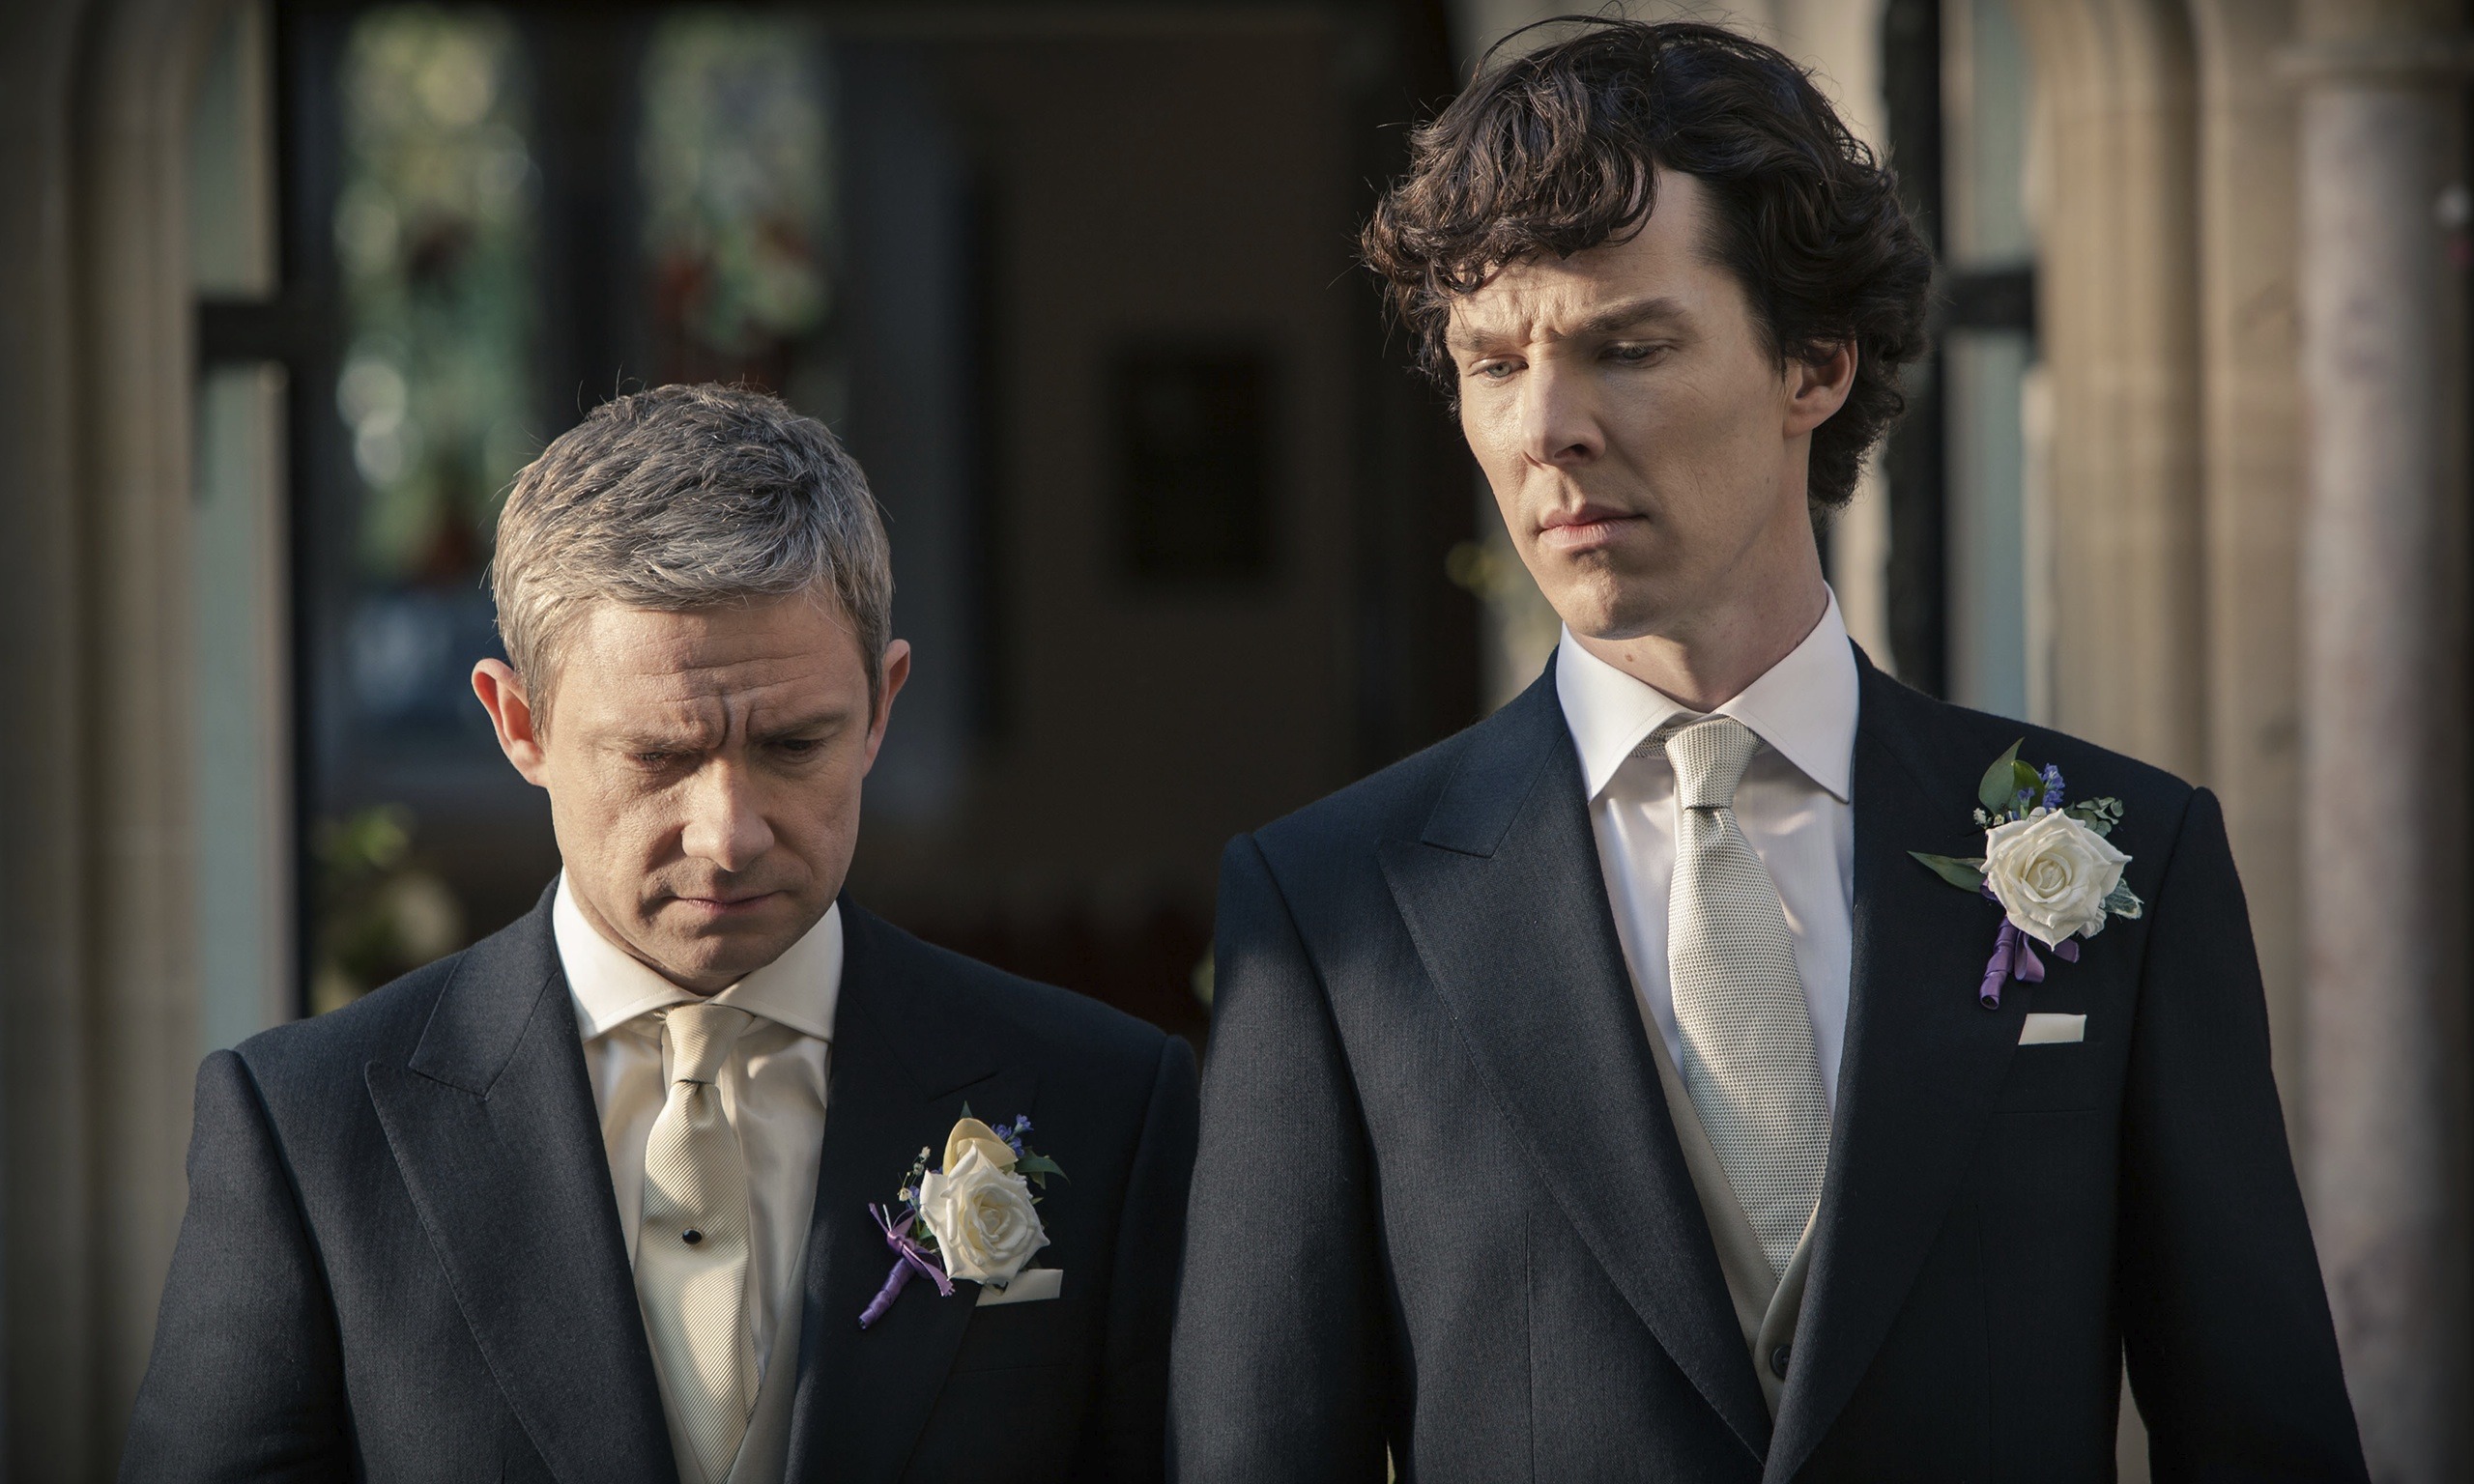 Handy guide: which ‘sherlock’ episode fits your mood?